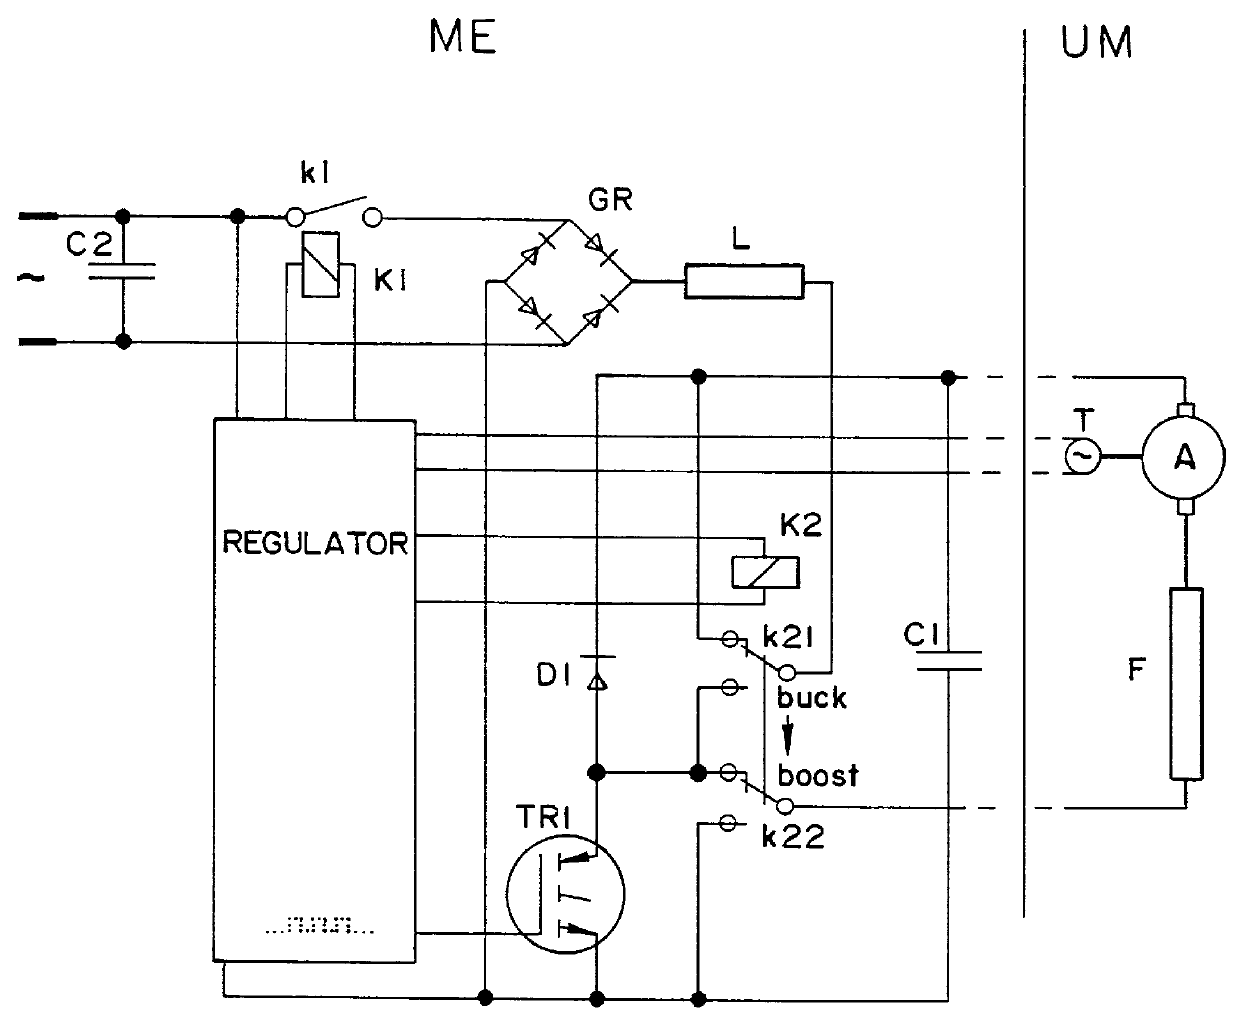 Rotary speed control circuit for feeding a dc universal motor